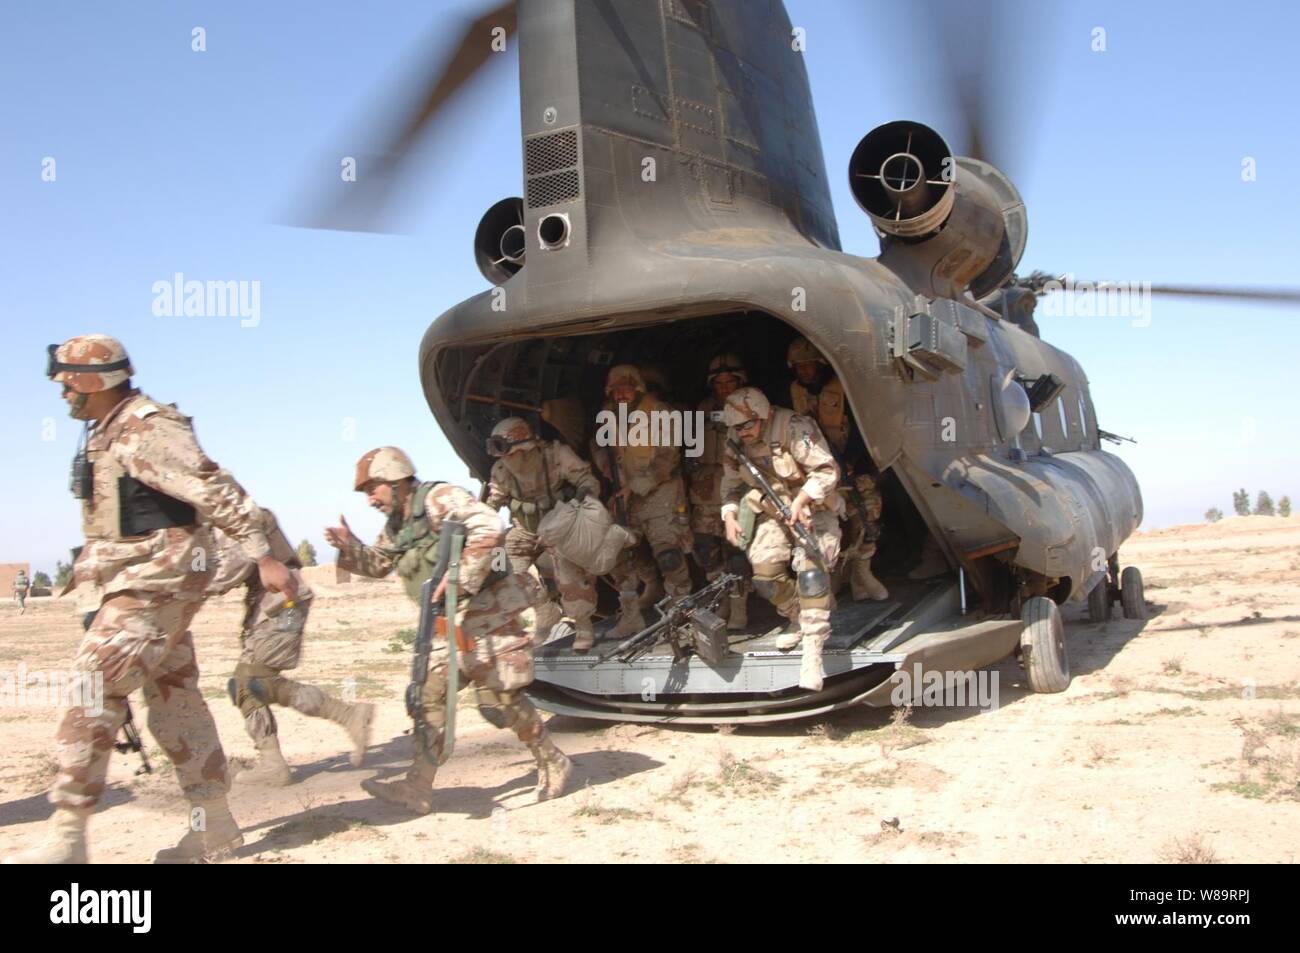 Iraqi and U.S. Army soldiers exit a U.S. Army CH-47 Chinook helicopter during Operation Swarmer in Iraq on March 16, 2006.  Soldiers from the Iraqi Army's 1st Brigade, 4th Division and the U.S. Army are taking part in the combined air assault operation to clear the area northeast of Samarra of suspected insurgents. Stock Photo